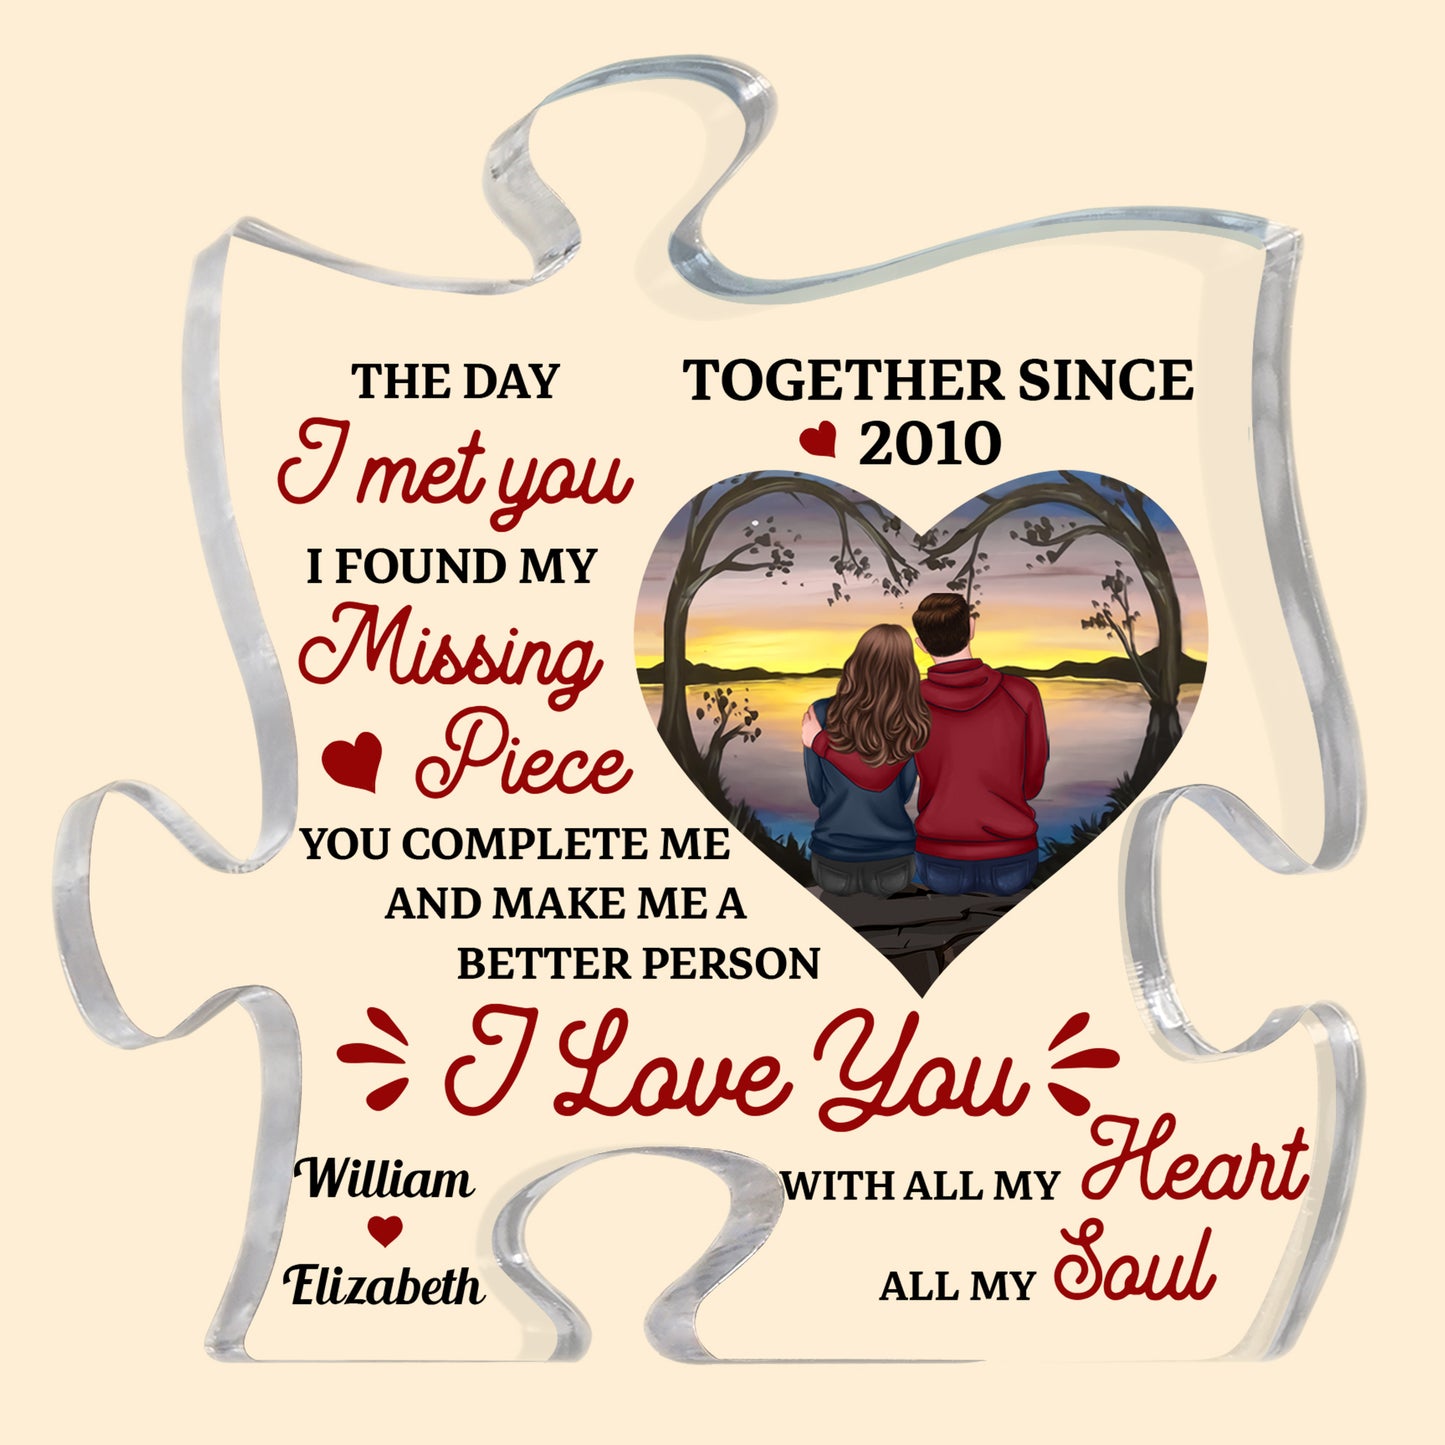 The Day I Met You I Found My Missing Piece - Personalized Puzzle Piece Acrylic Plaque